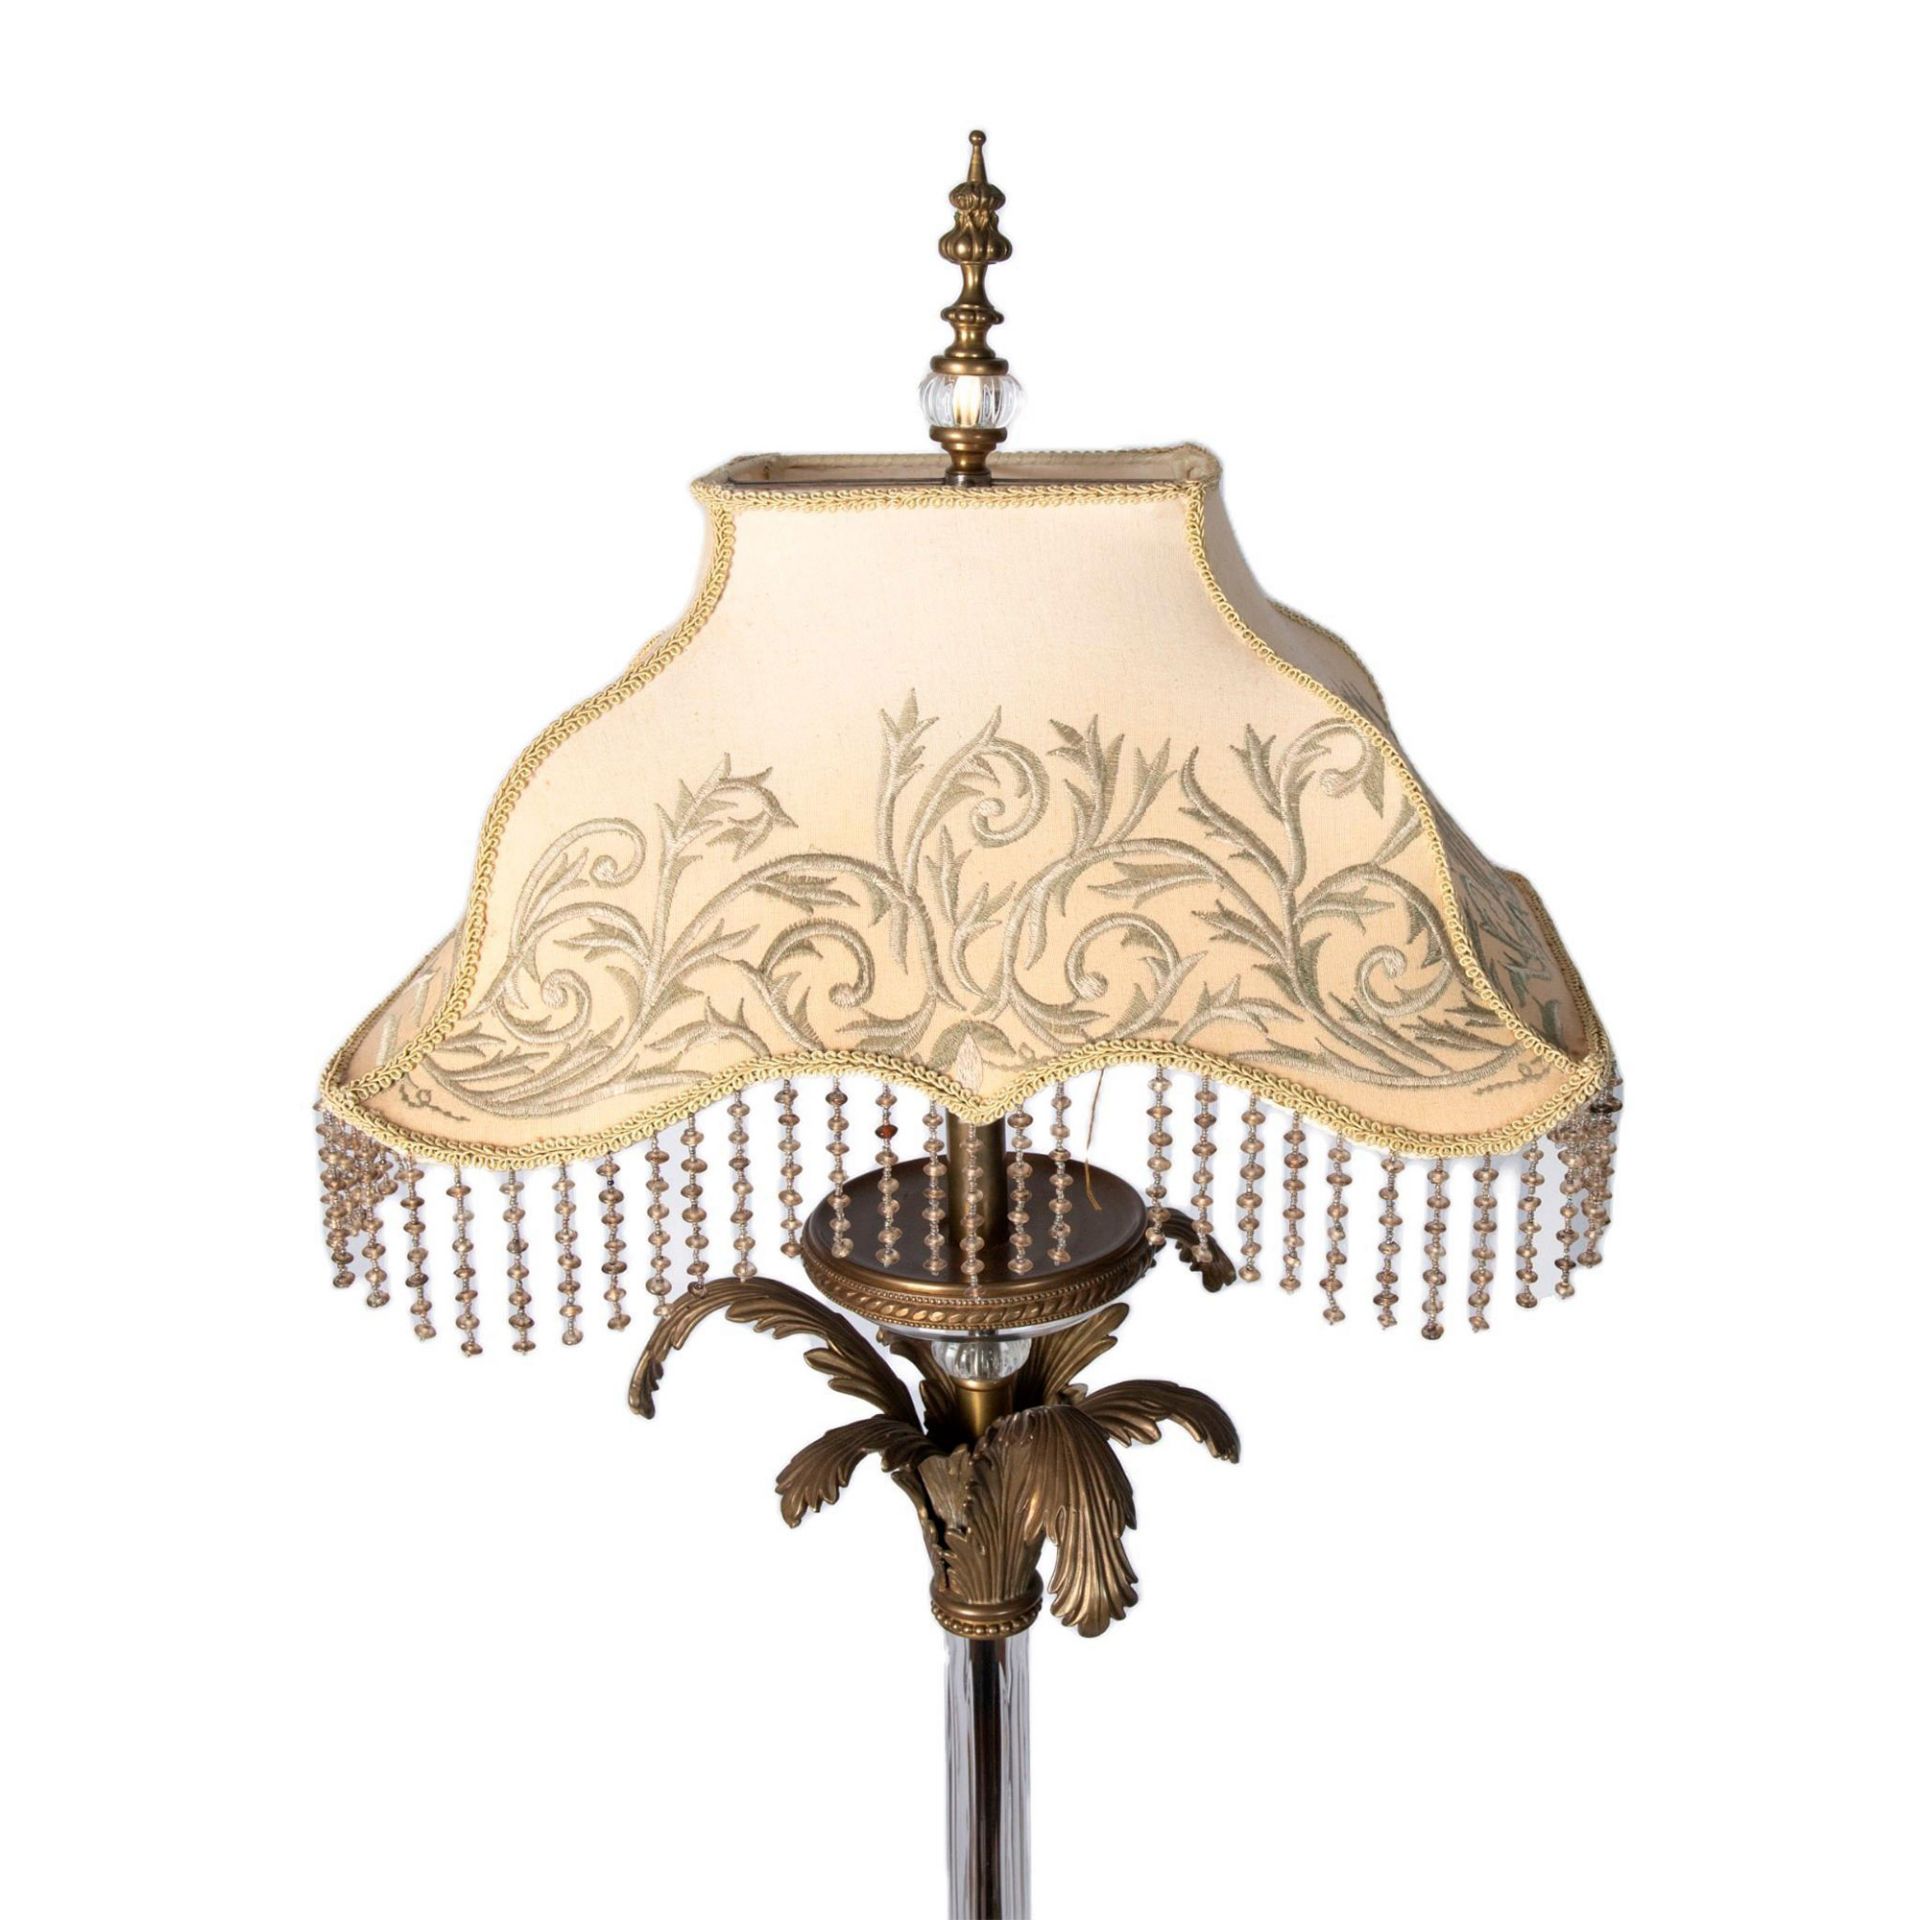 Baroque Style Brass and Glass Ornate Floor Lamp - Image 3 of 9